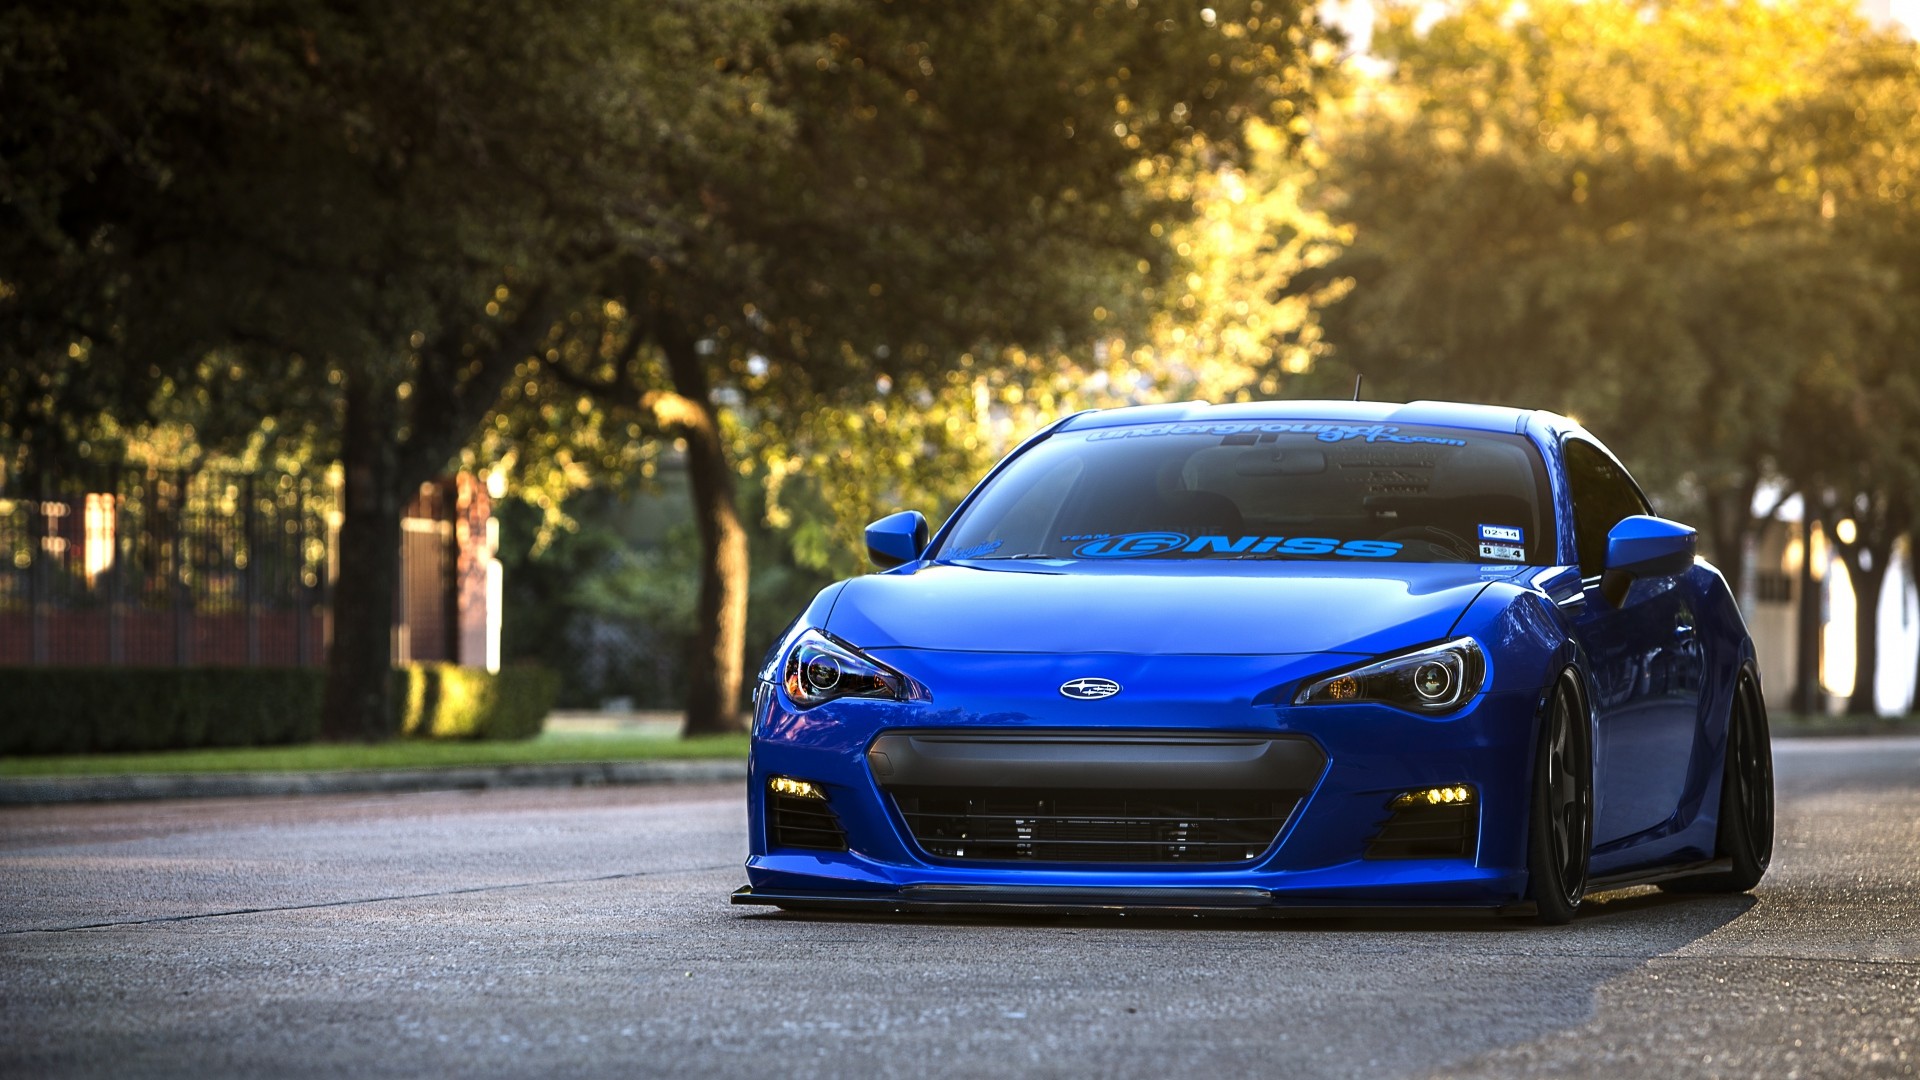 1920x1080 Subaru Sports Car Wallpapers Picture with HD Desktop  px 802.07 KB